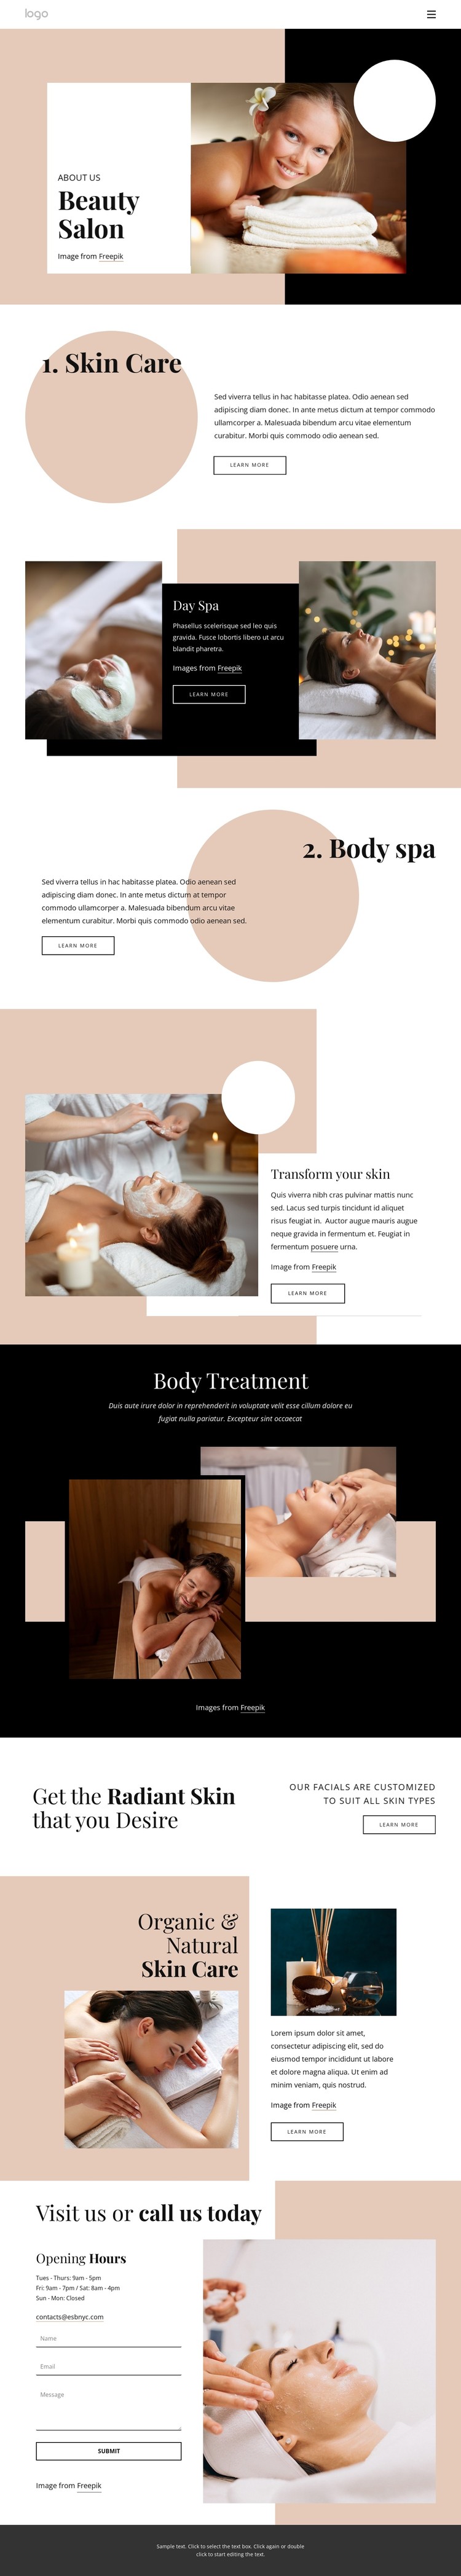 New wellness experiences CSS Template